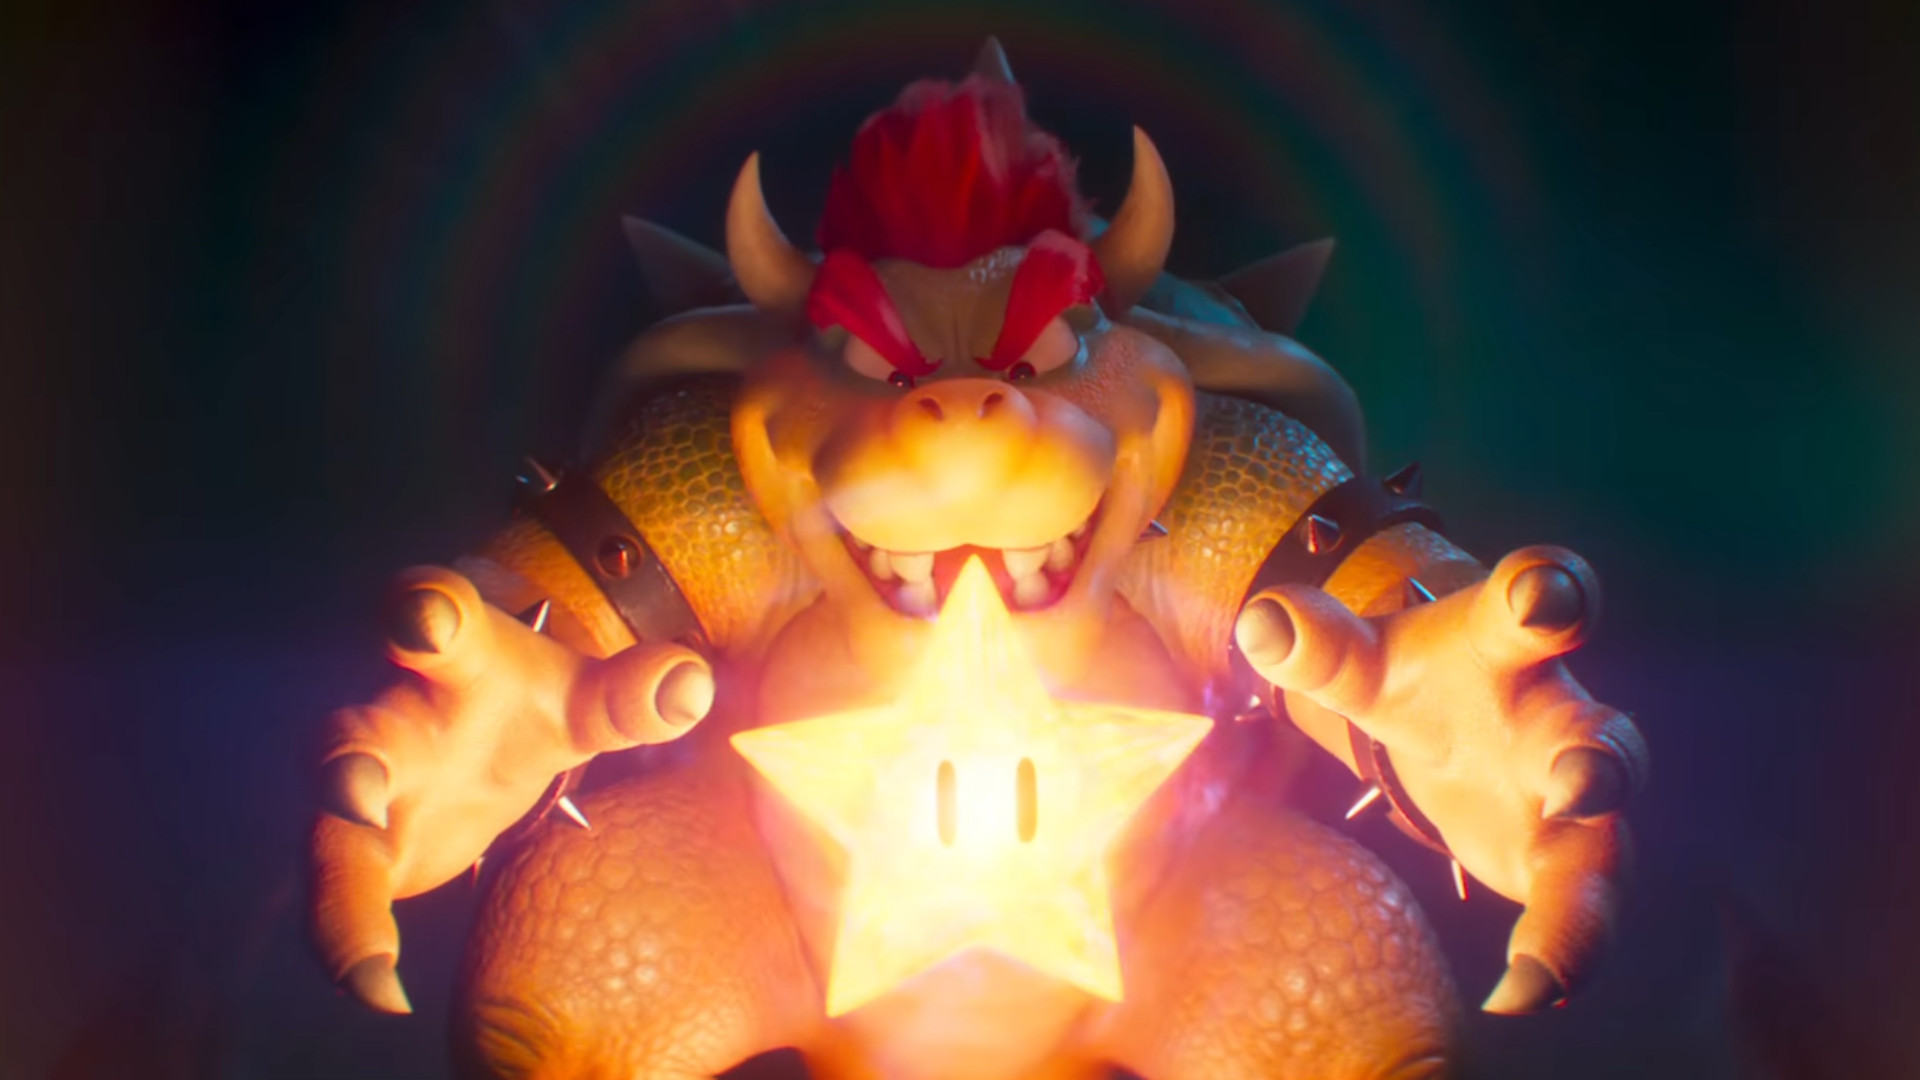 The Mario movie trailer is here and fans have decided Bowser's the main character | GamesRadar+